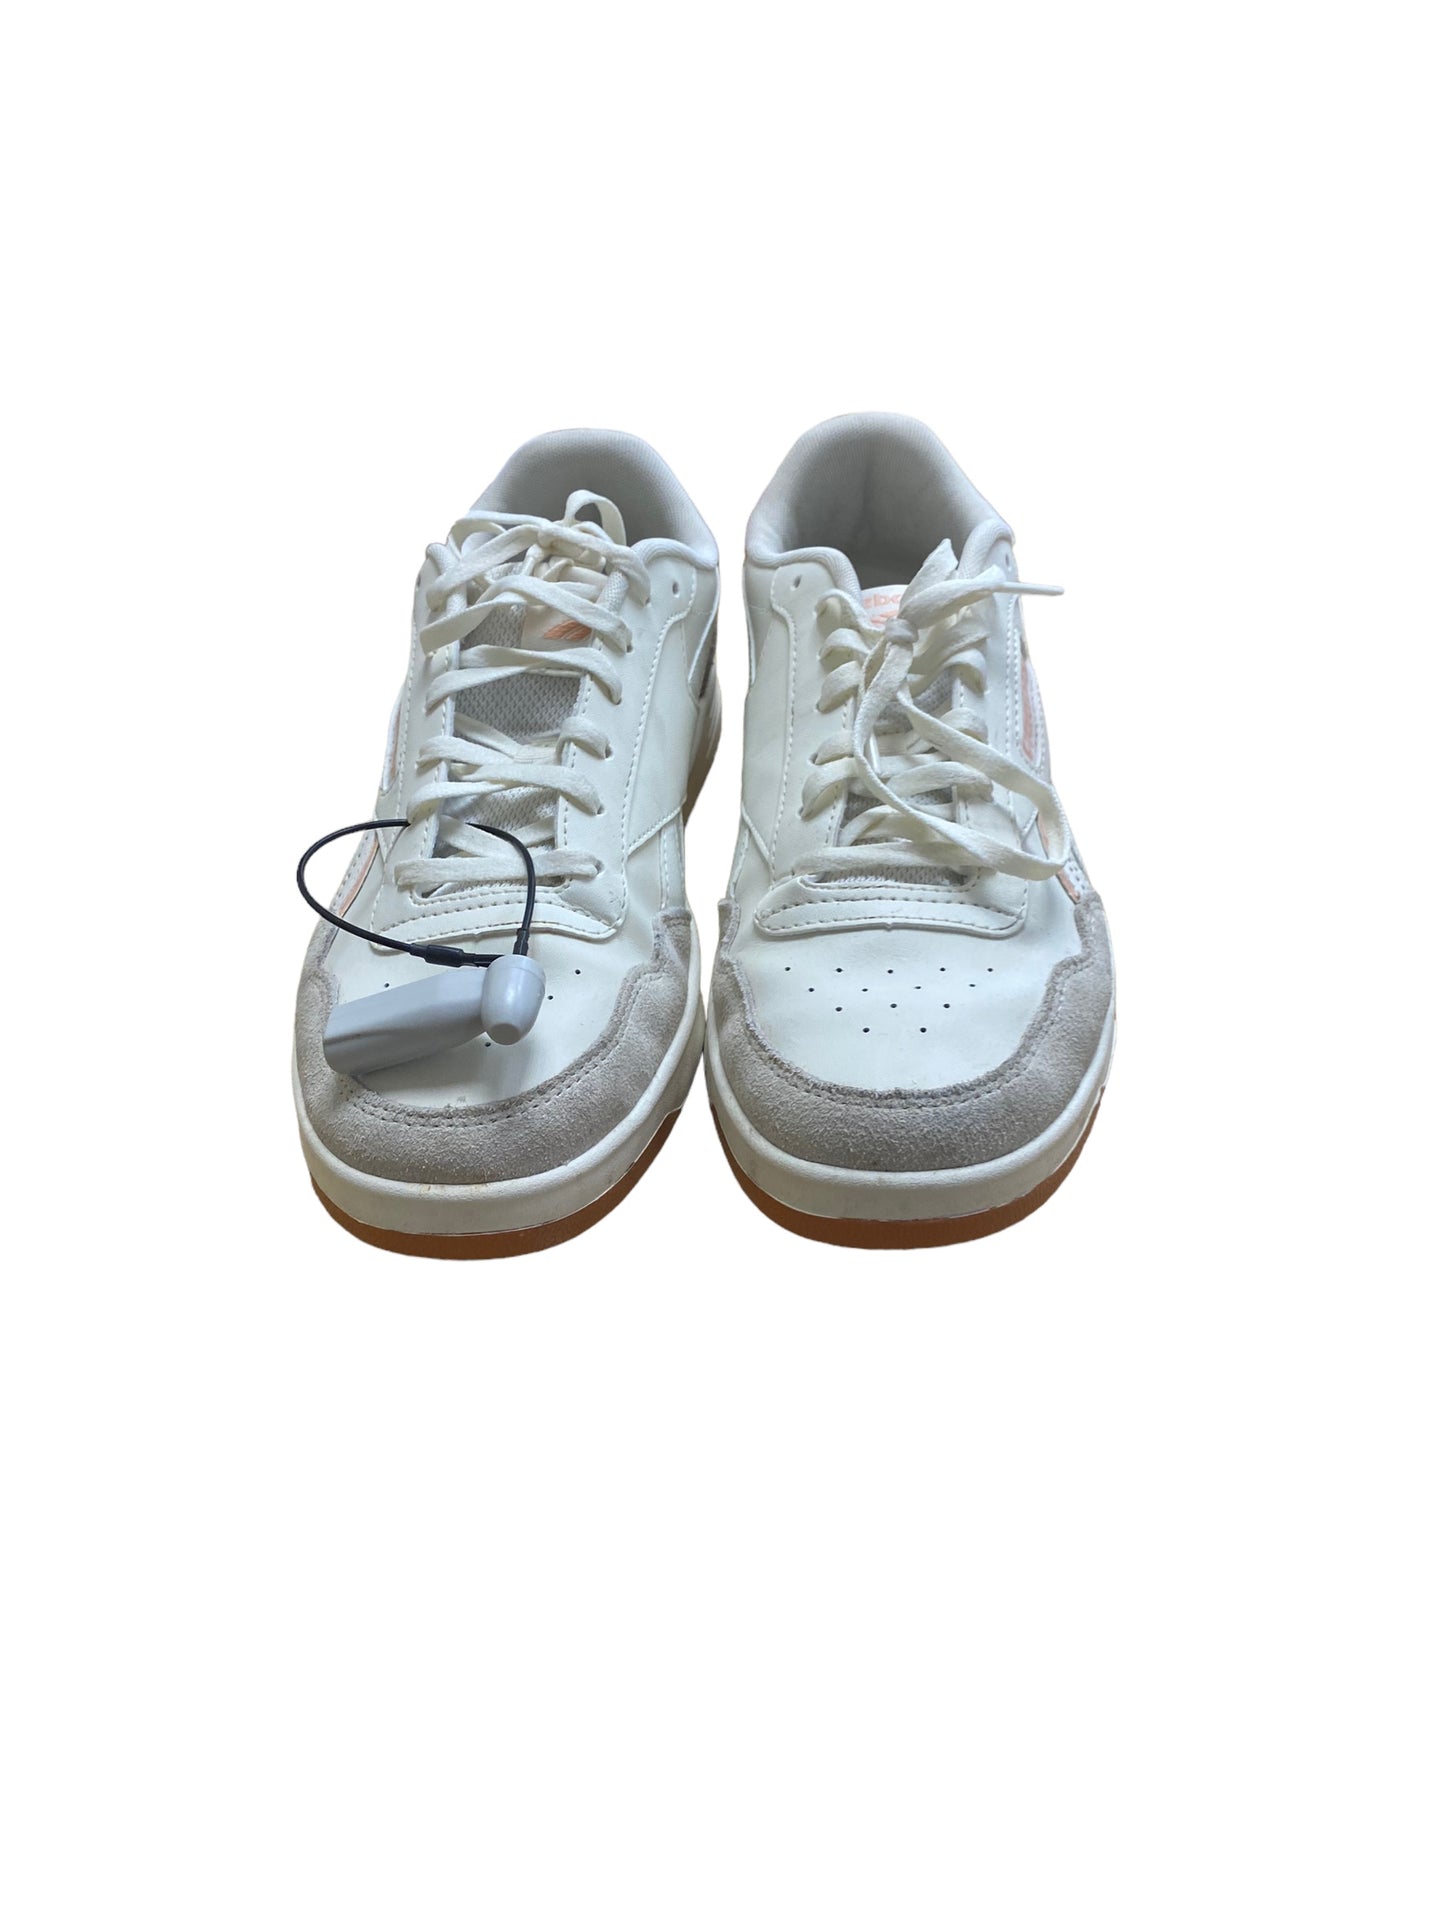 Shoes Sneakers By Reebok  Size: 9